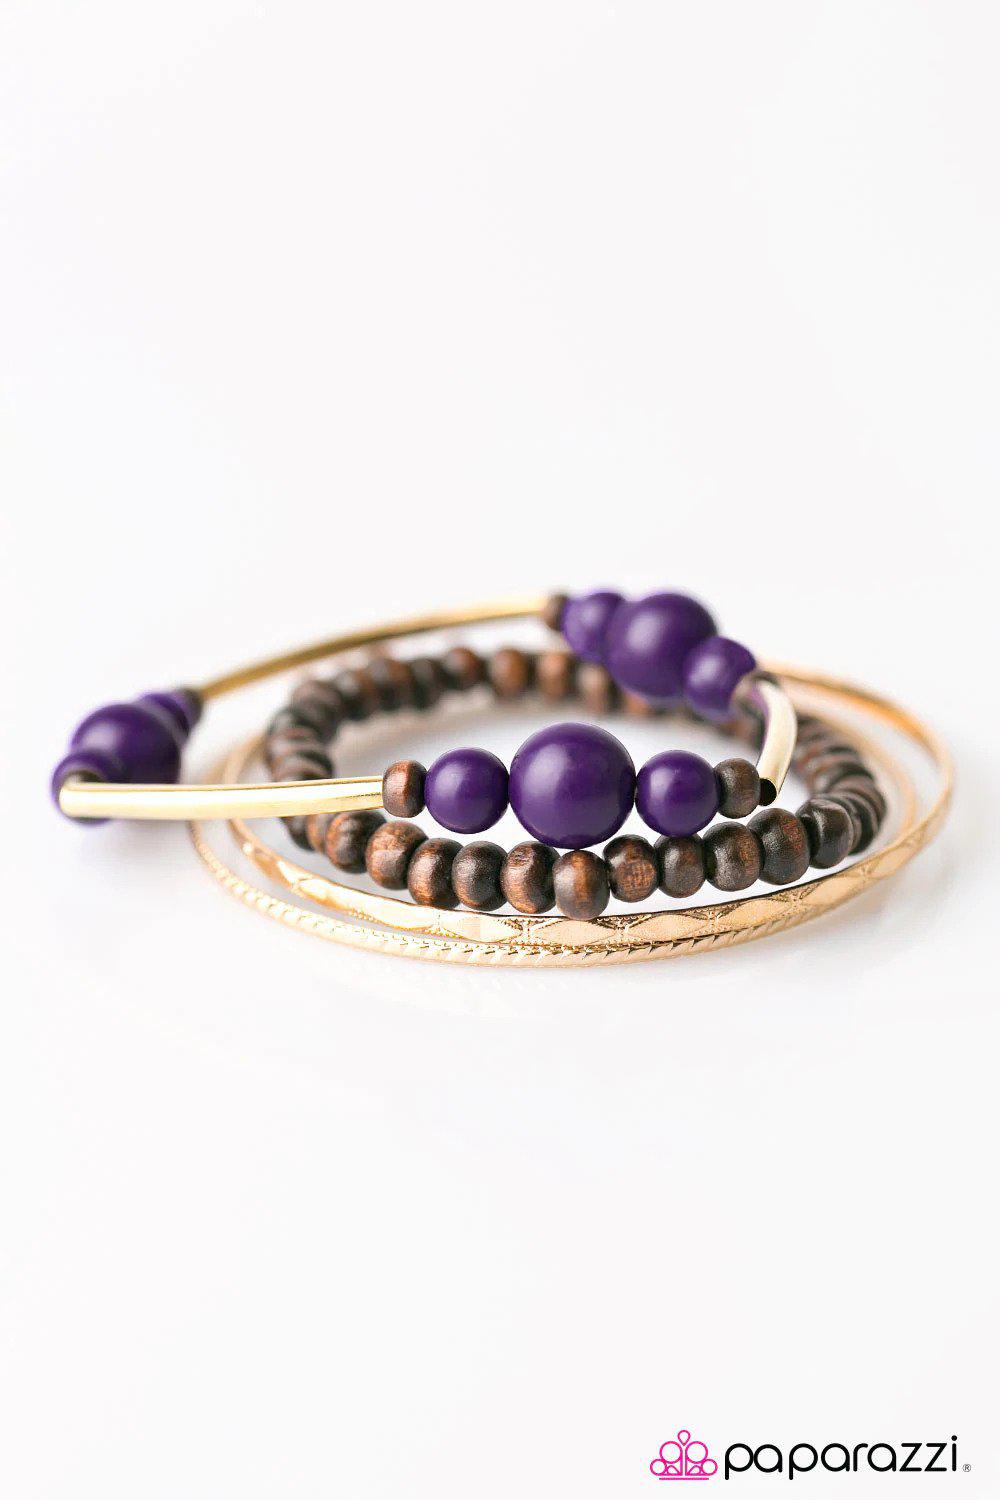 All or Nothing Purple Bracelet - Paparazzi Accessories- lightbox - CarasShop.com - $5 Jewelry by Cara Jewels